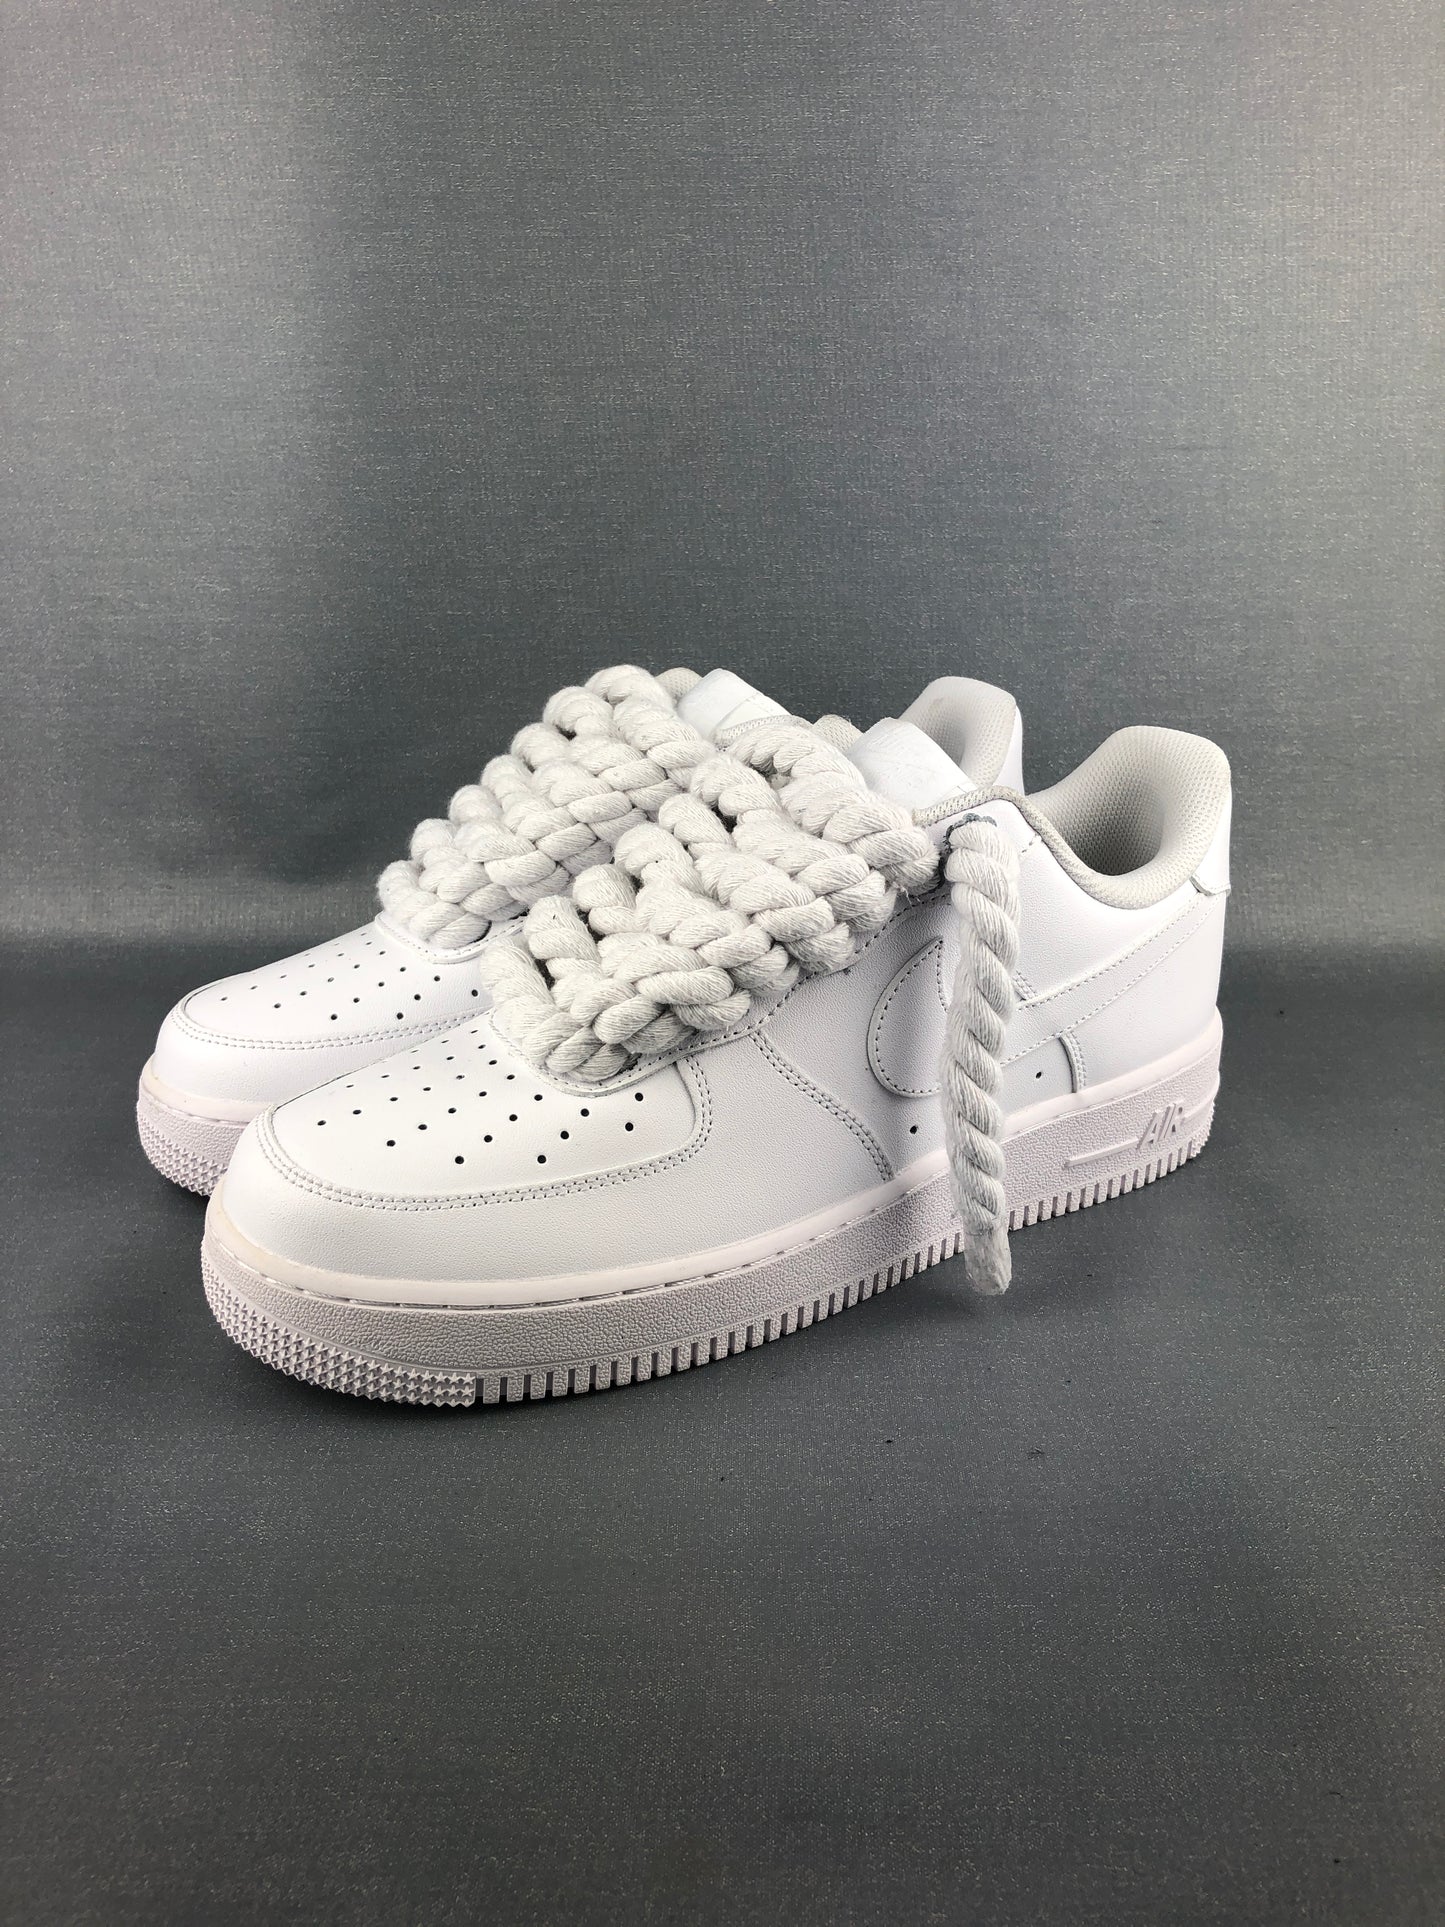 AF1 White | Rope Forces White 